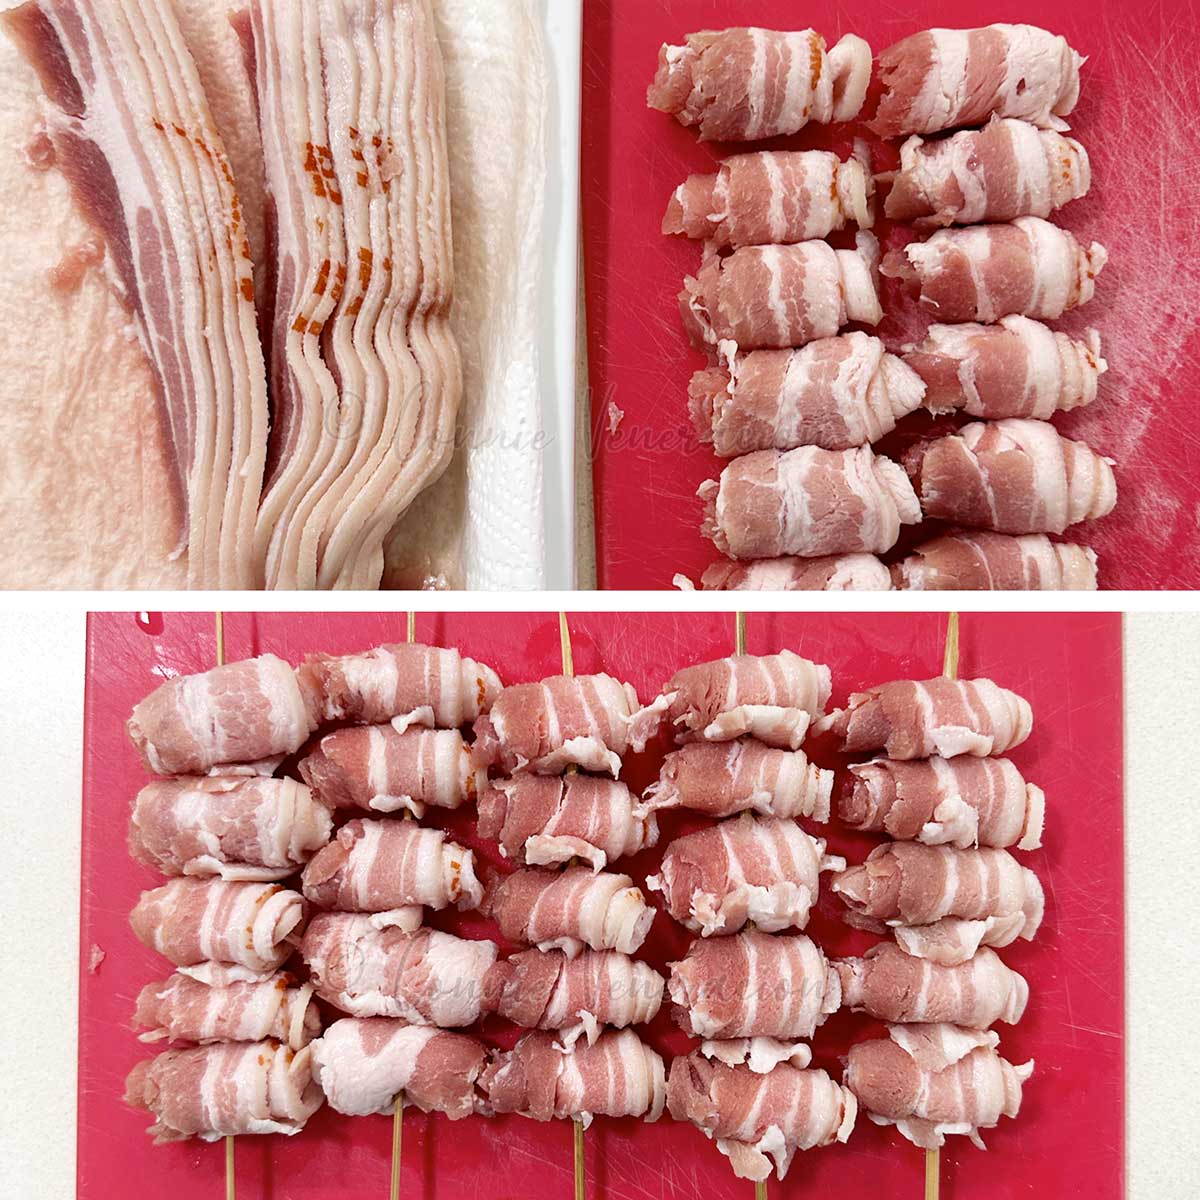 Rolled and skewered bacon-cut pork belly